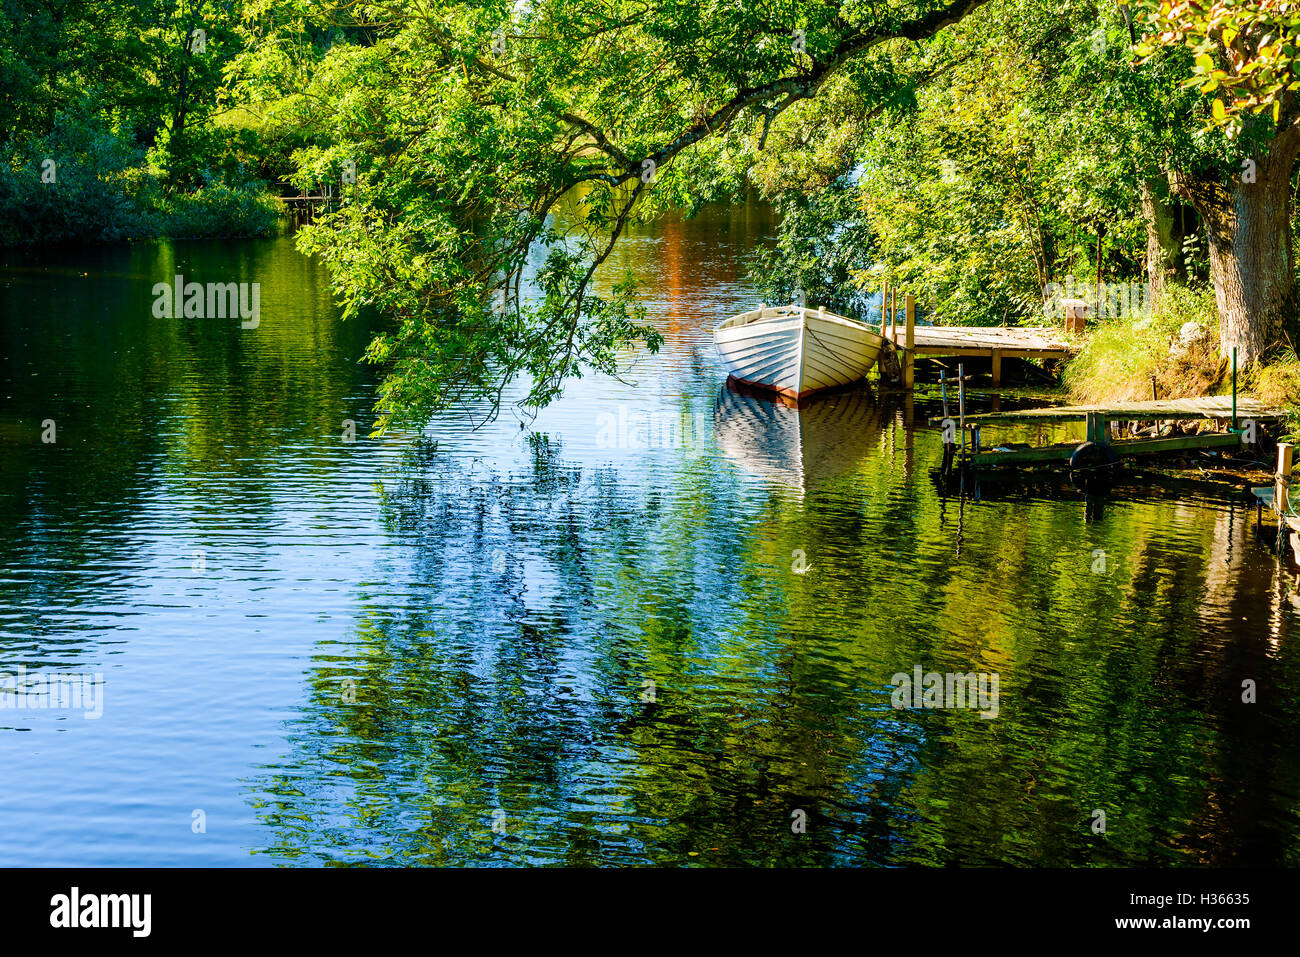 Wooden rowboat moored riverside under a large tree branch. The river Morrumsan in Sweden. Copy space under branch and boat. Stock Photo